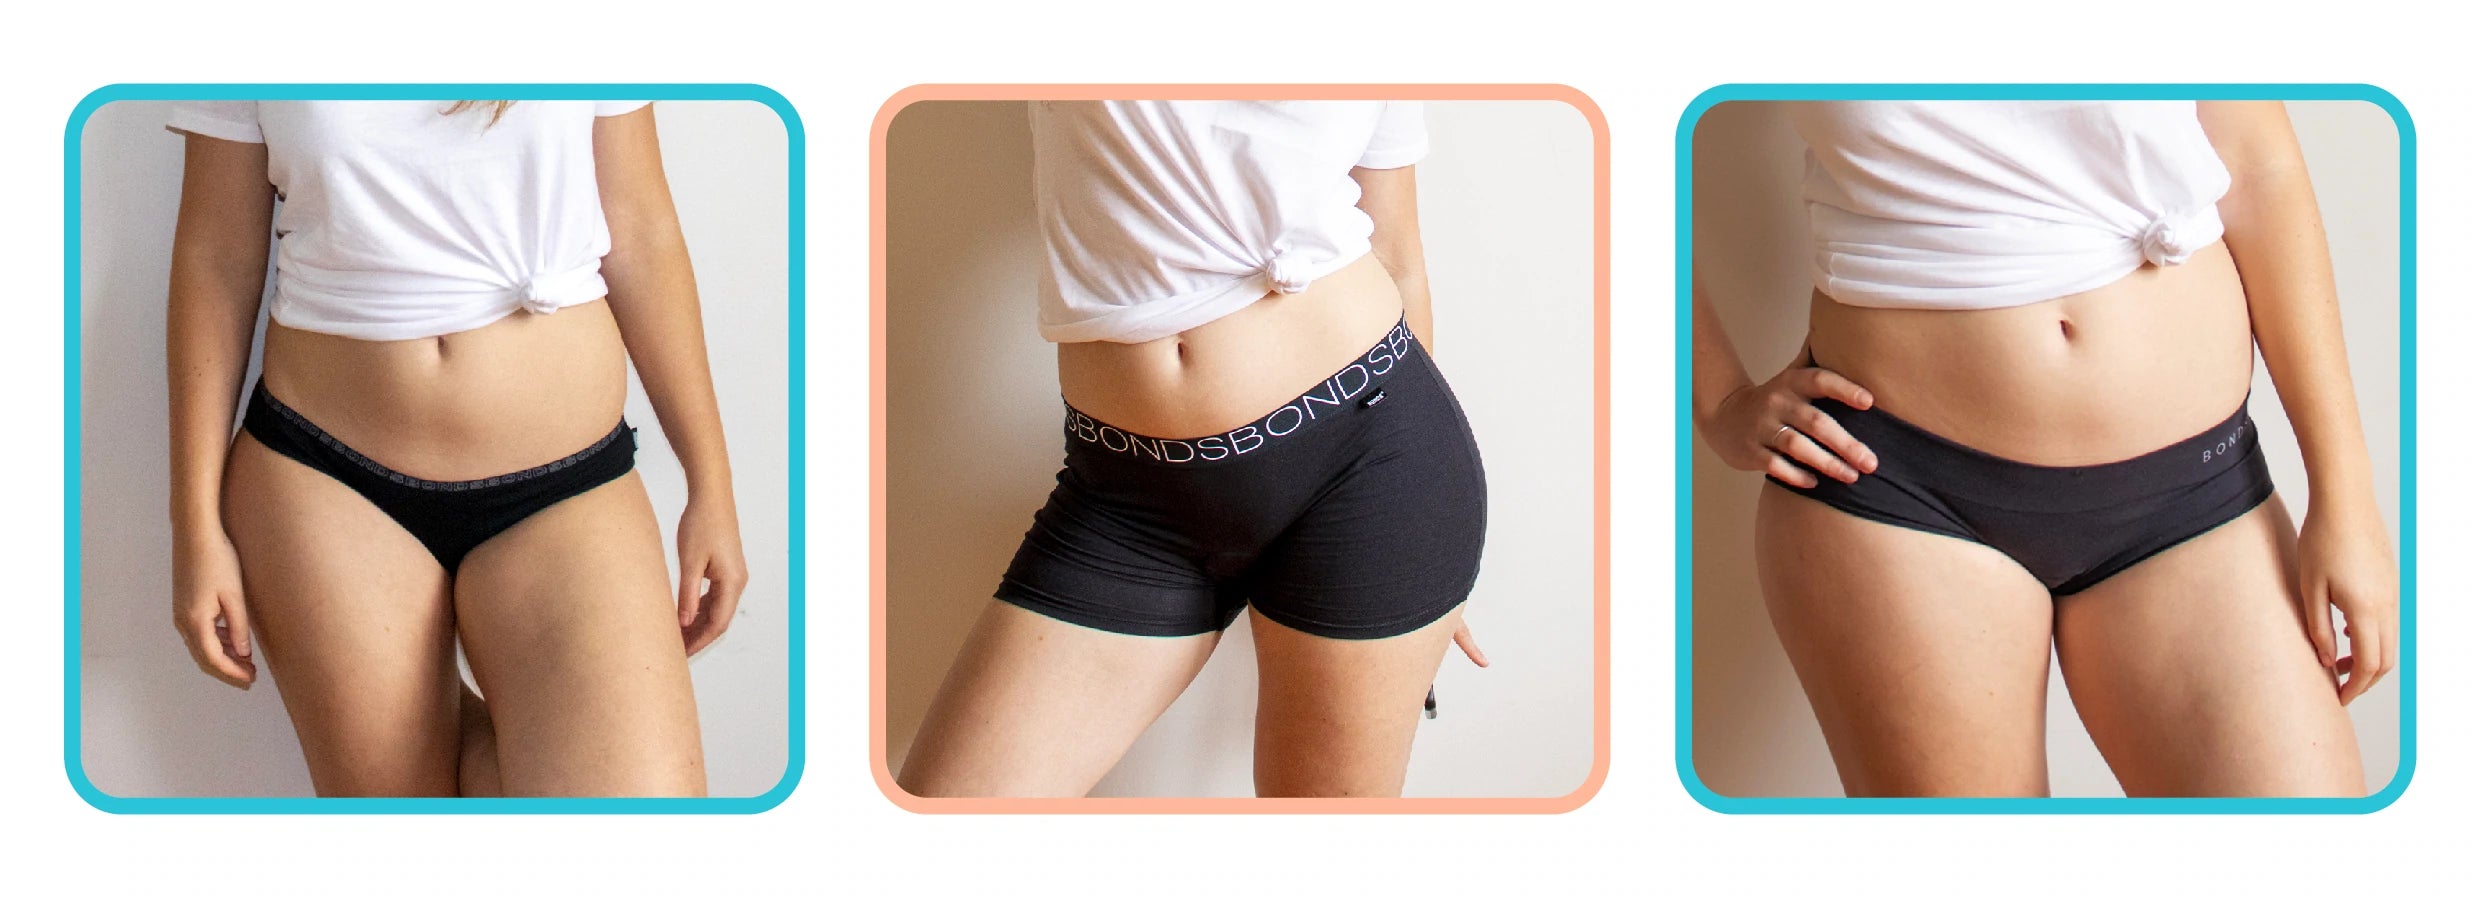 Leak-Proof Panties: A Game-Changer for Comfort, Sustainability